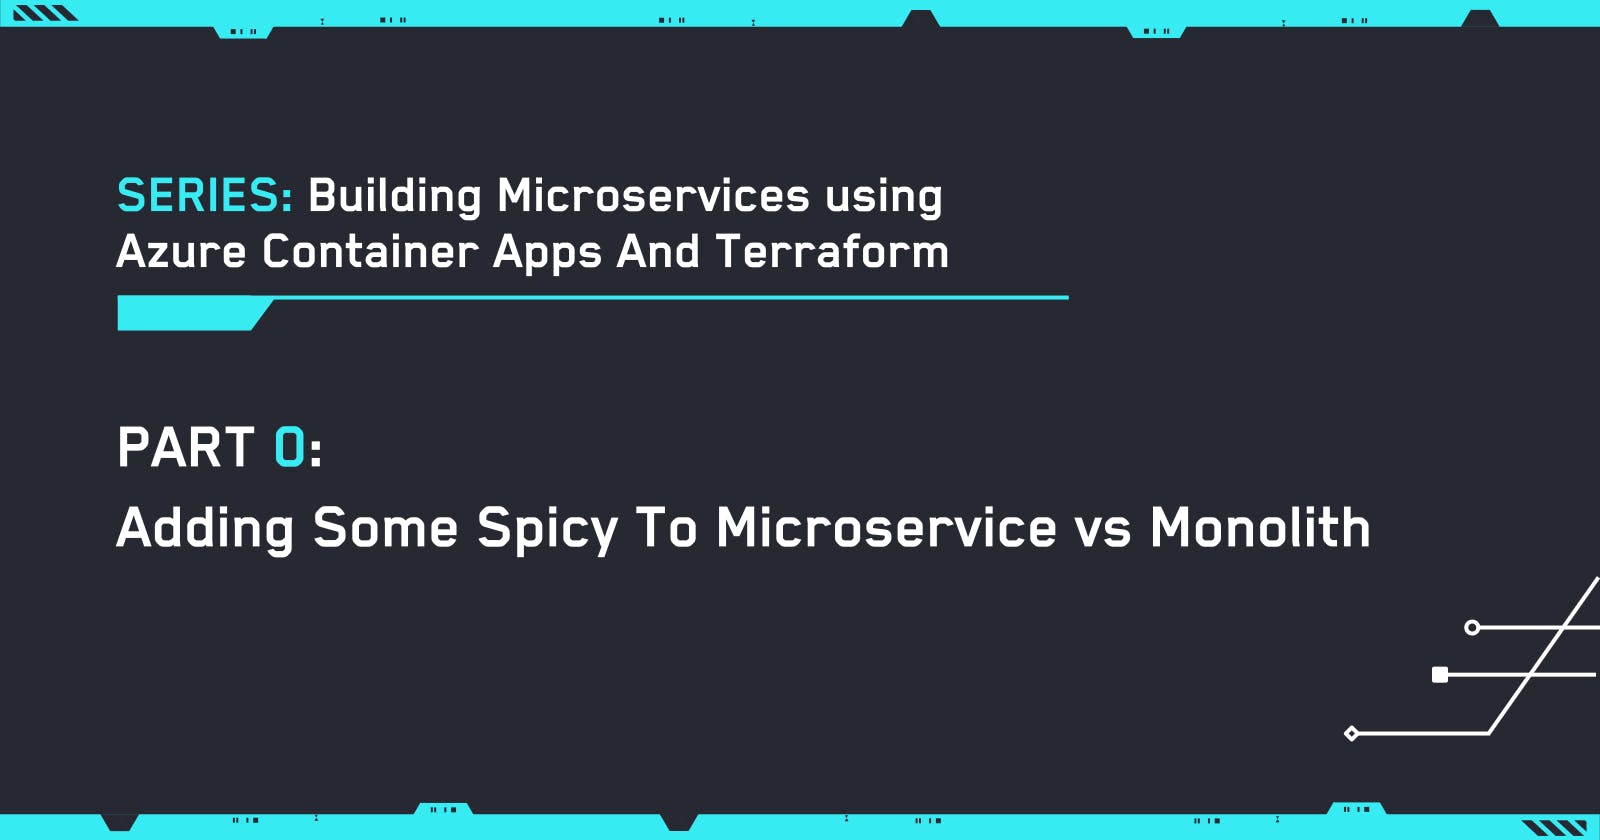 Part 0: Adding some spicy to Microservice vs Monolith